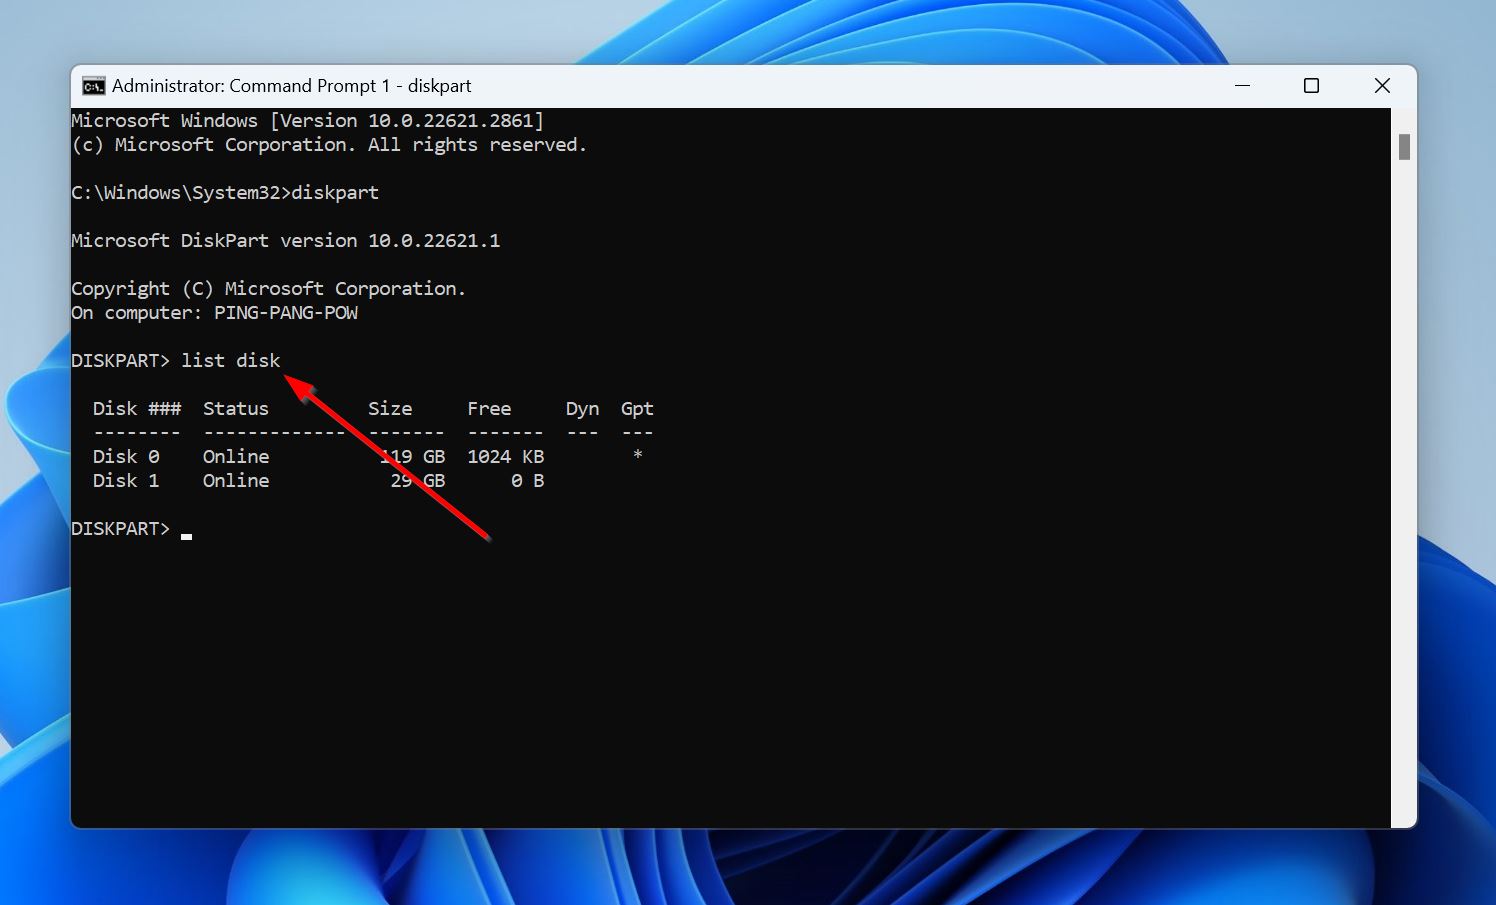 A screenshot of a command prompt window showing the DiskPart utility. The 'list disk' command has been issued, listing two disks: Disk 0 and Disk 1.